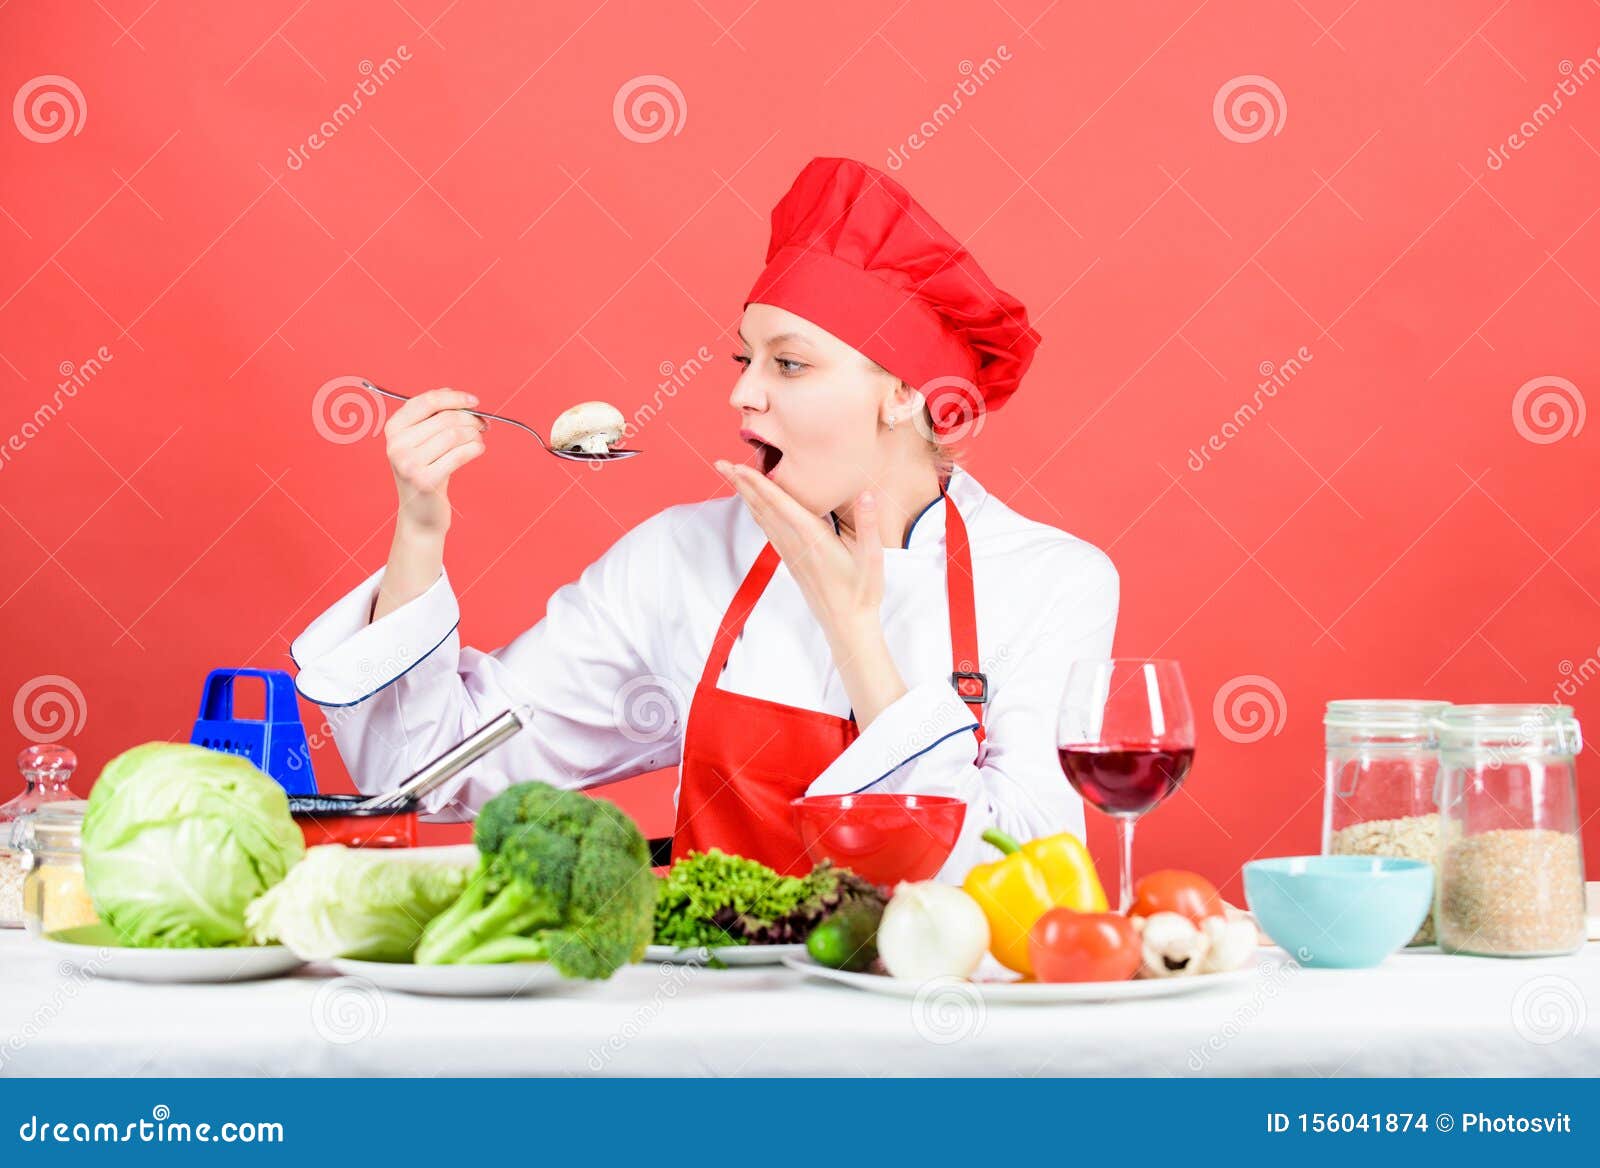 Professional Chef on Red Background. Restaurant Menu. Dieting ...